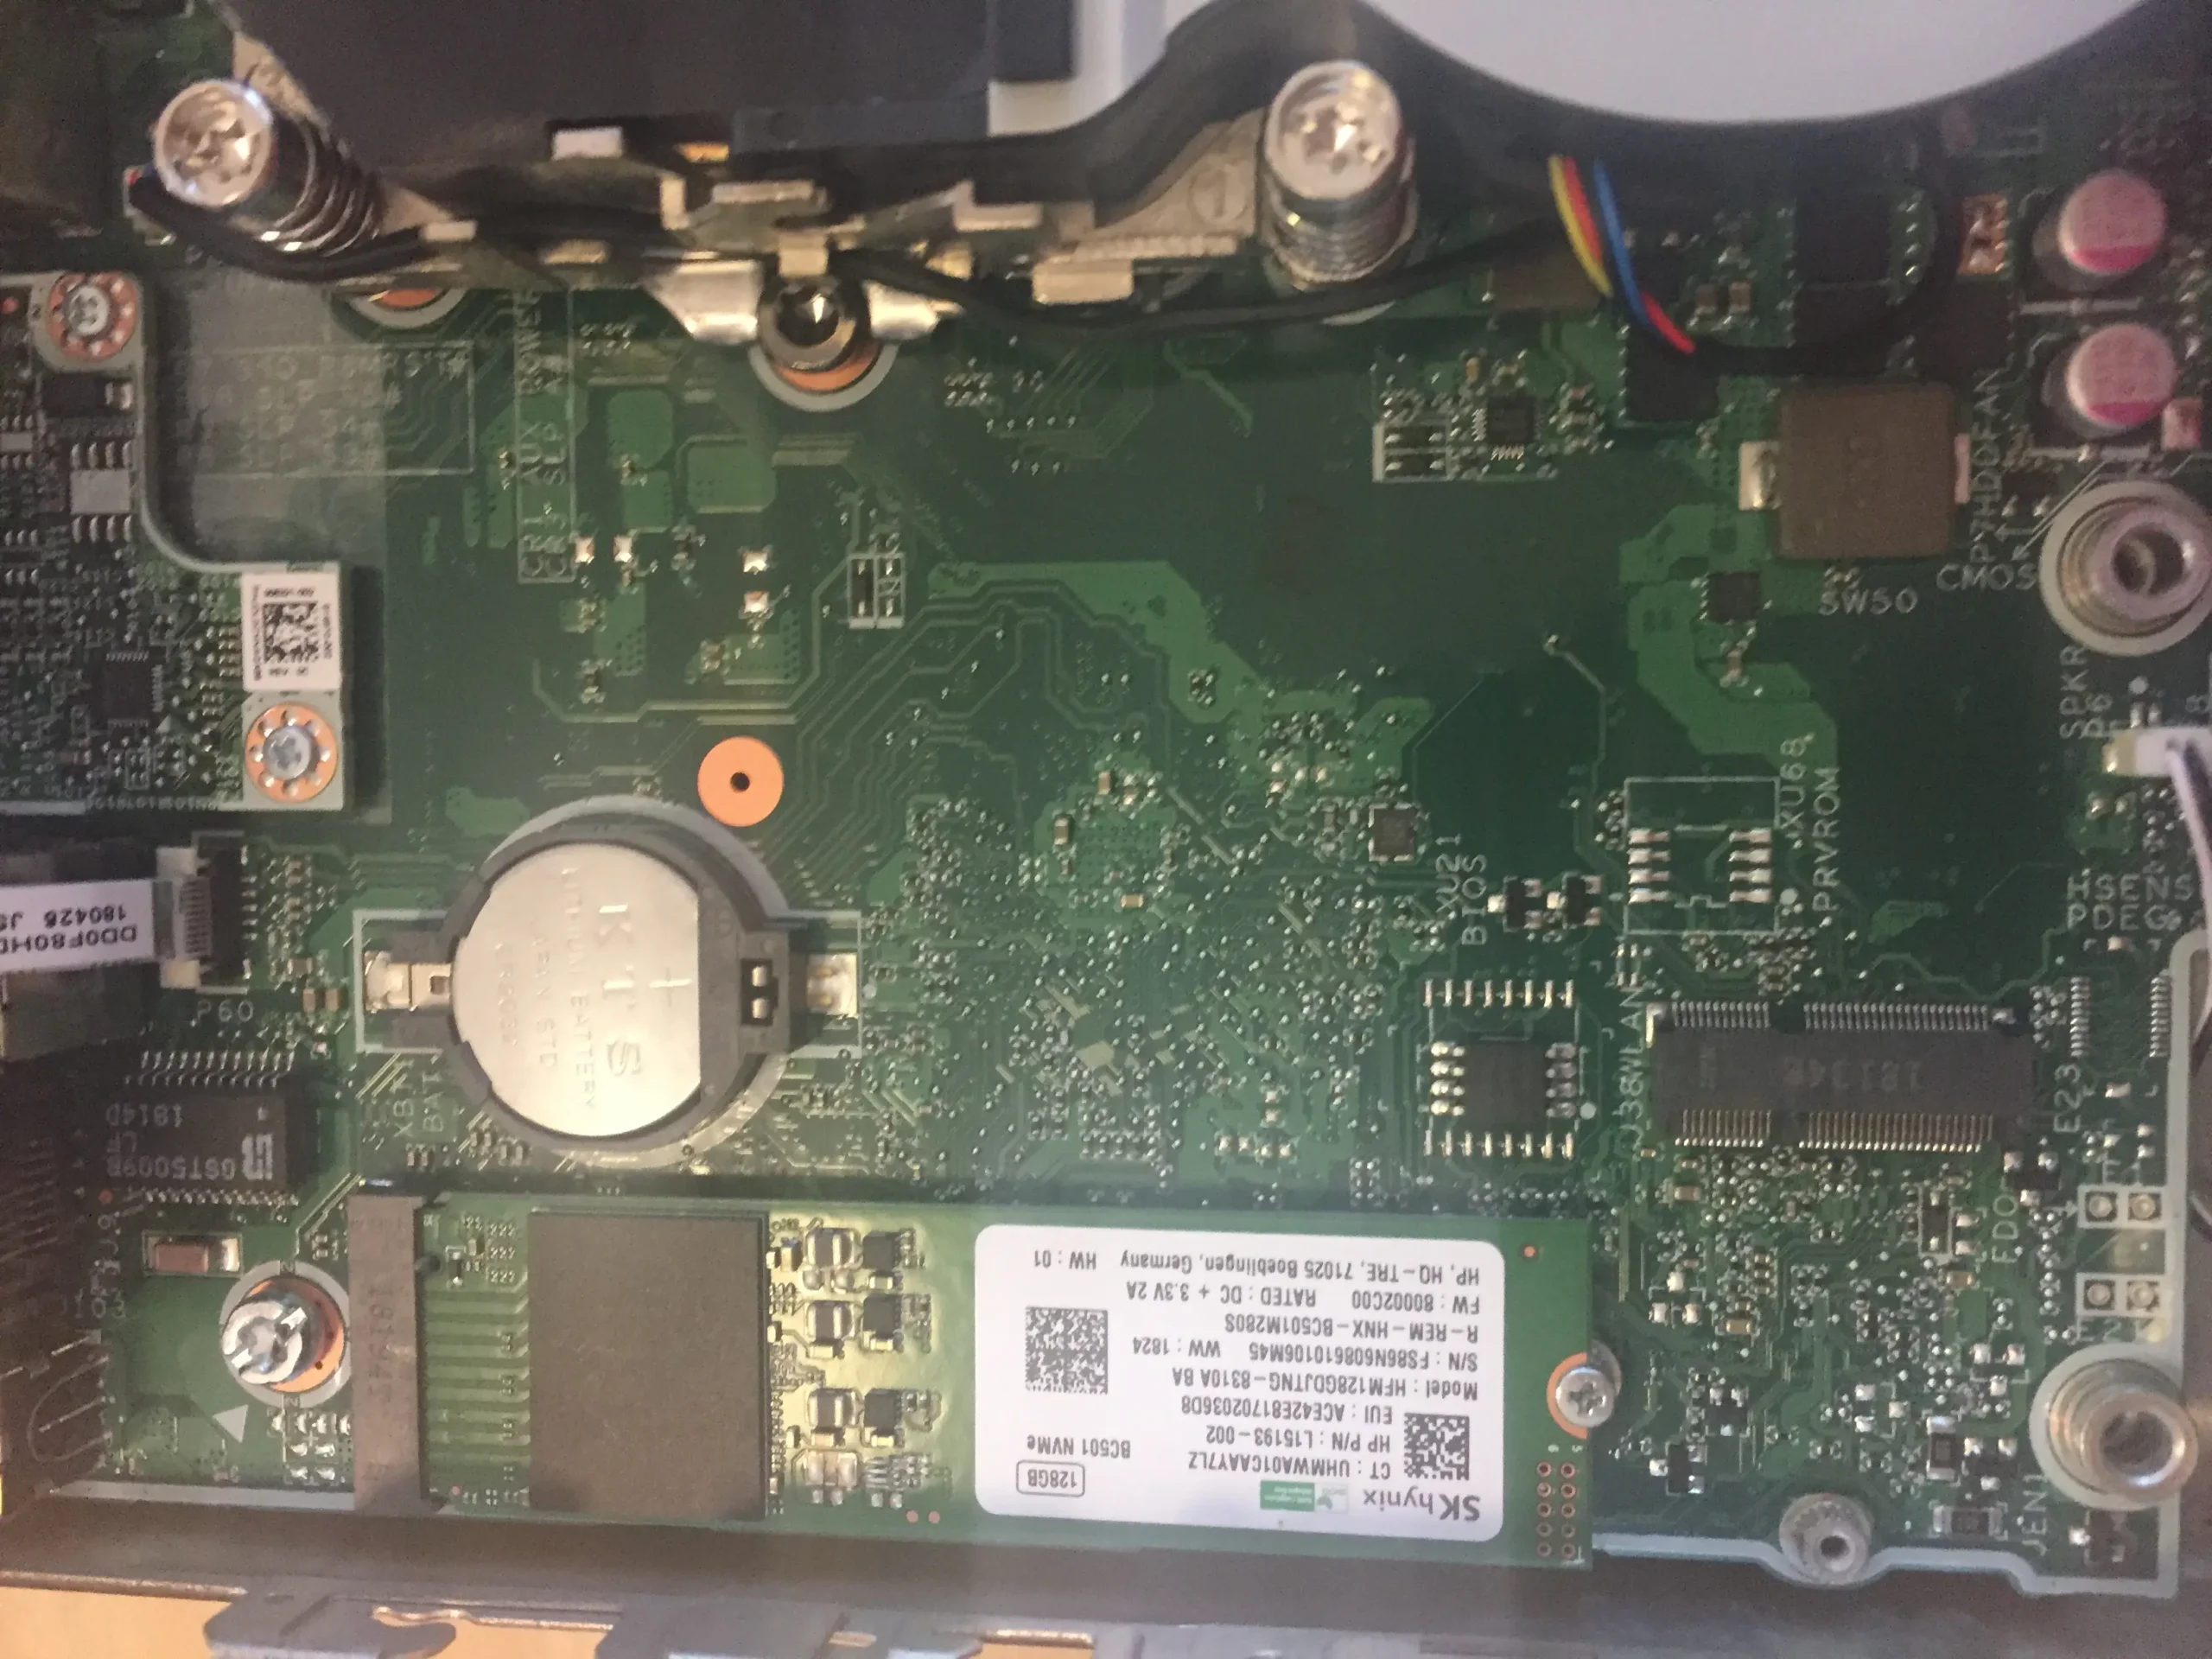 hewlett packard windsor pcb board clear bios password - How do I reset my HP BIOS administrator password